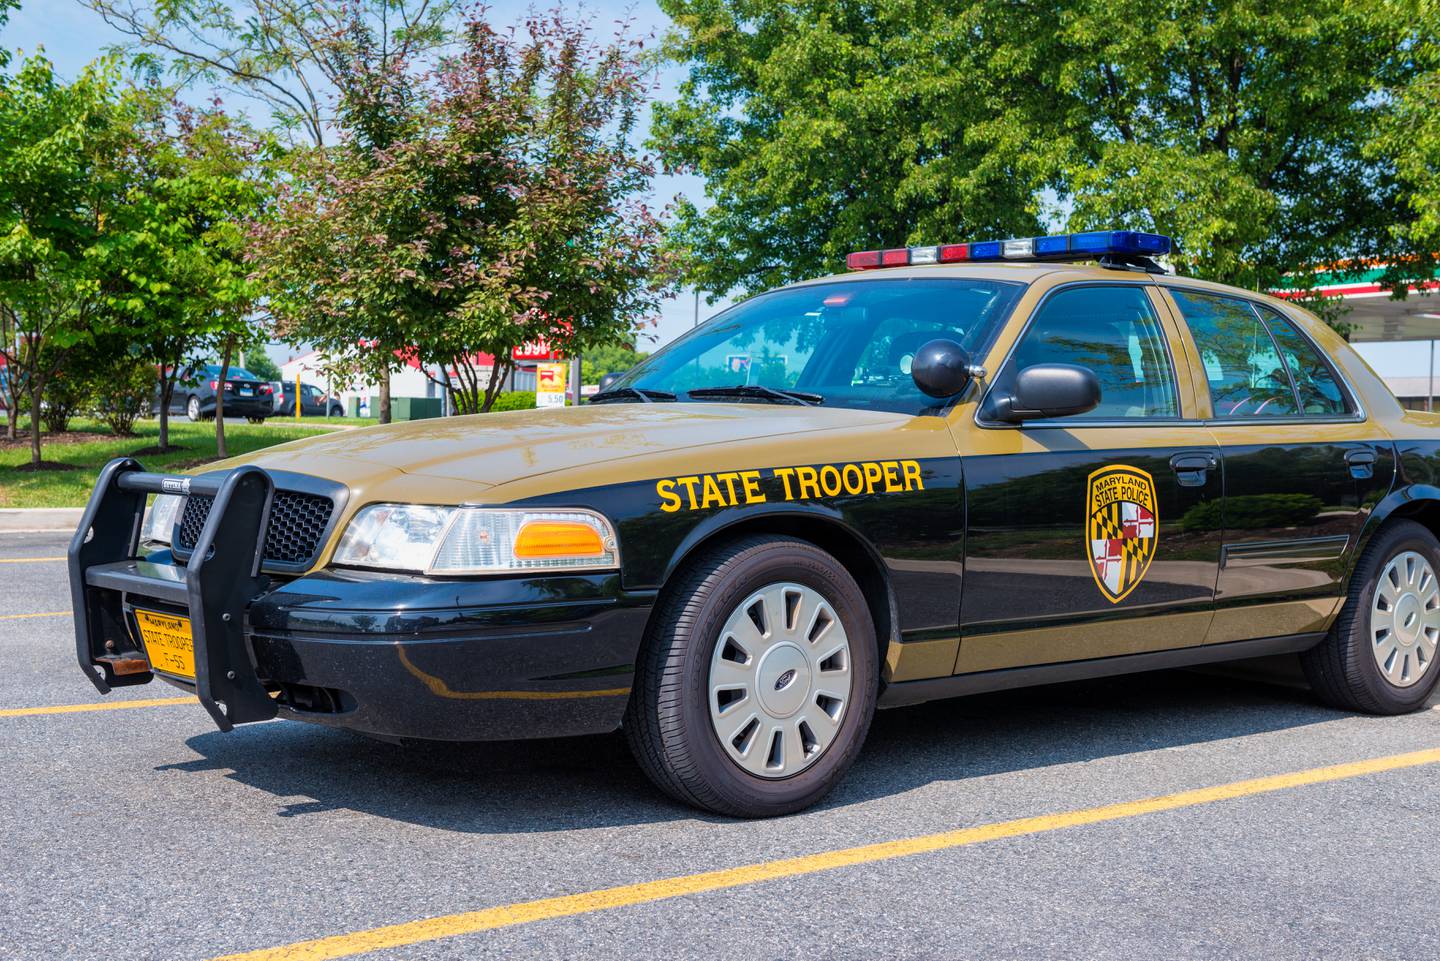 State Trooper Police Car from the Maryland State Police on parking lot.